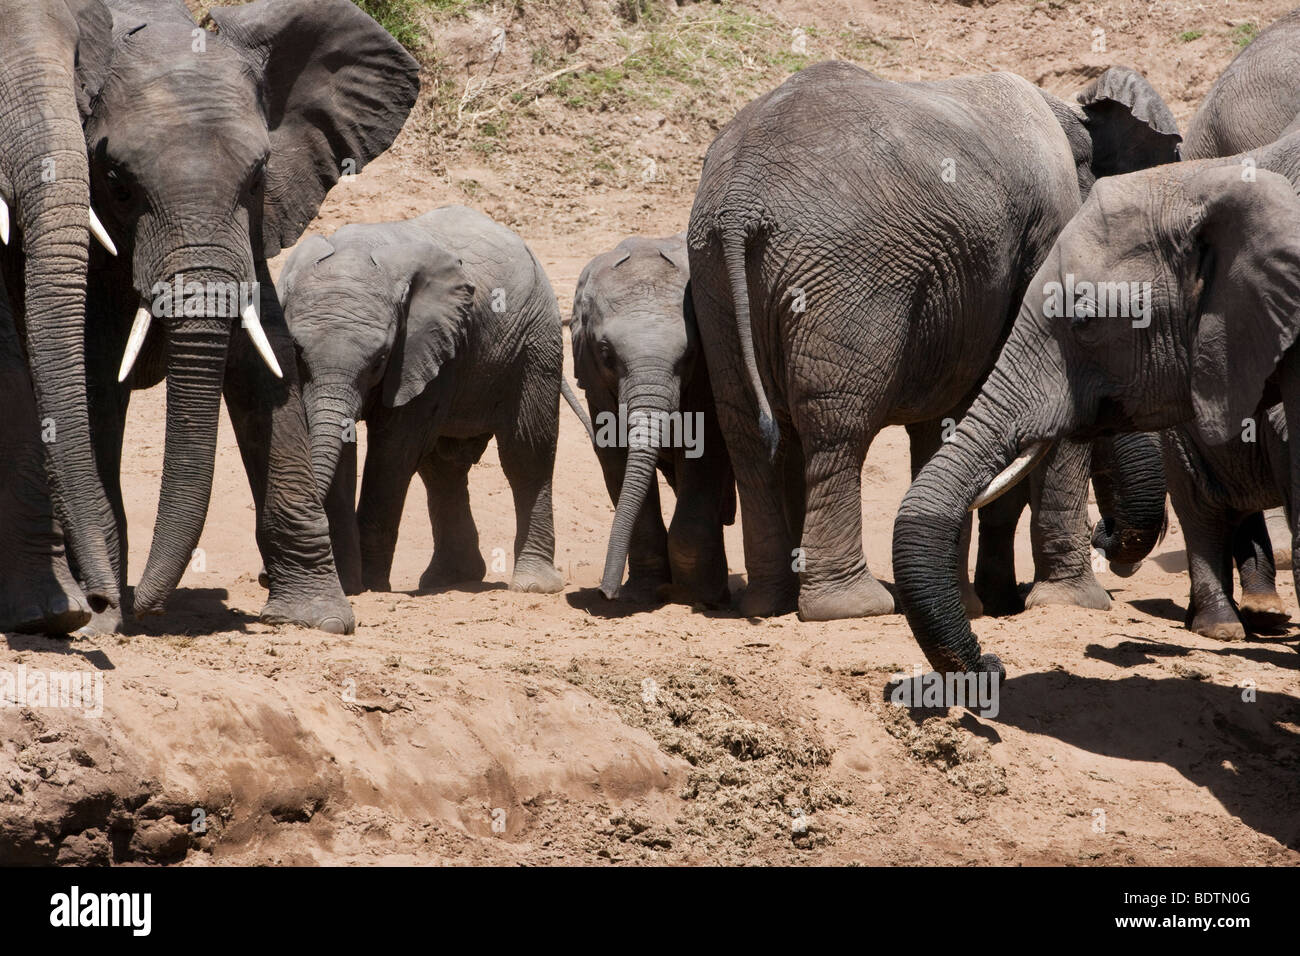 Adorably Cute twin baby African elephants leaning against their protective mother her ears out at river bank with large herd in Masai Mara of Kenya Stock Photo